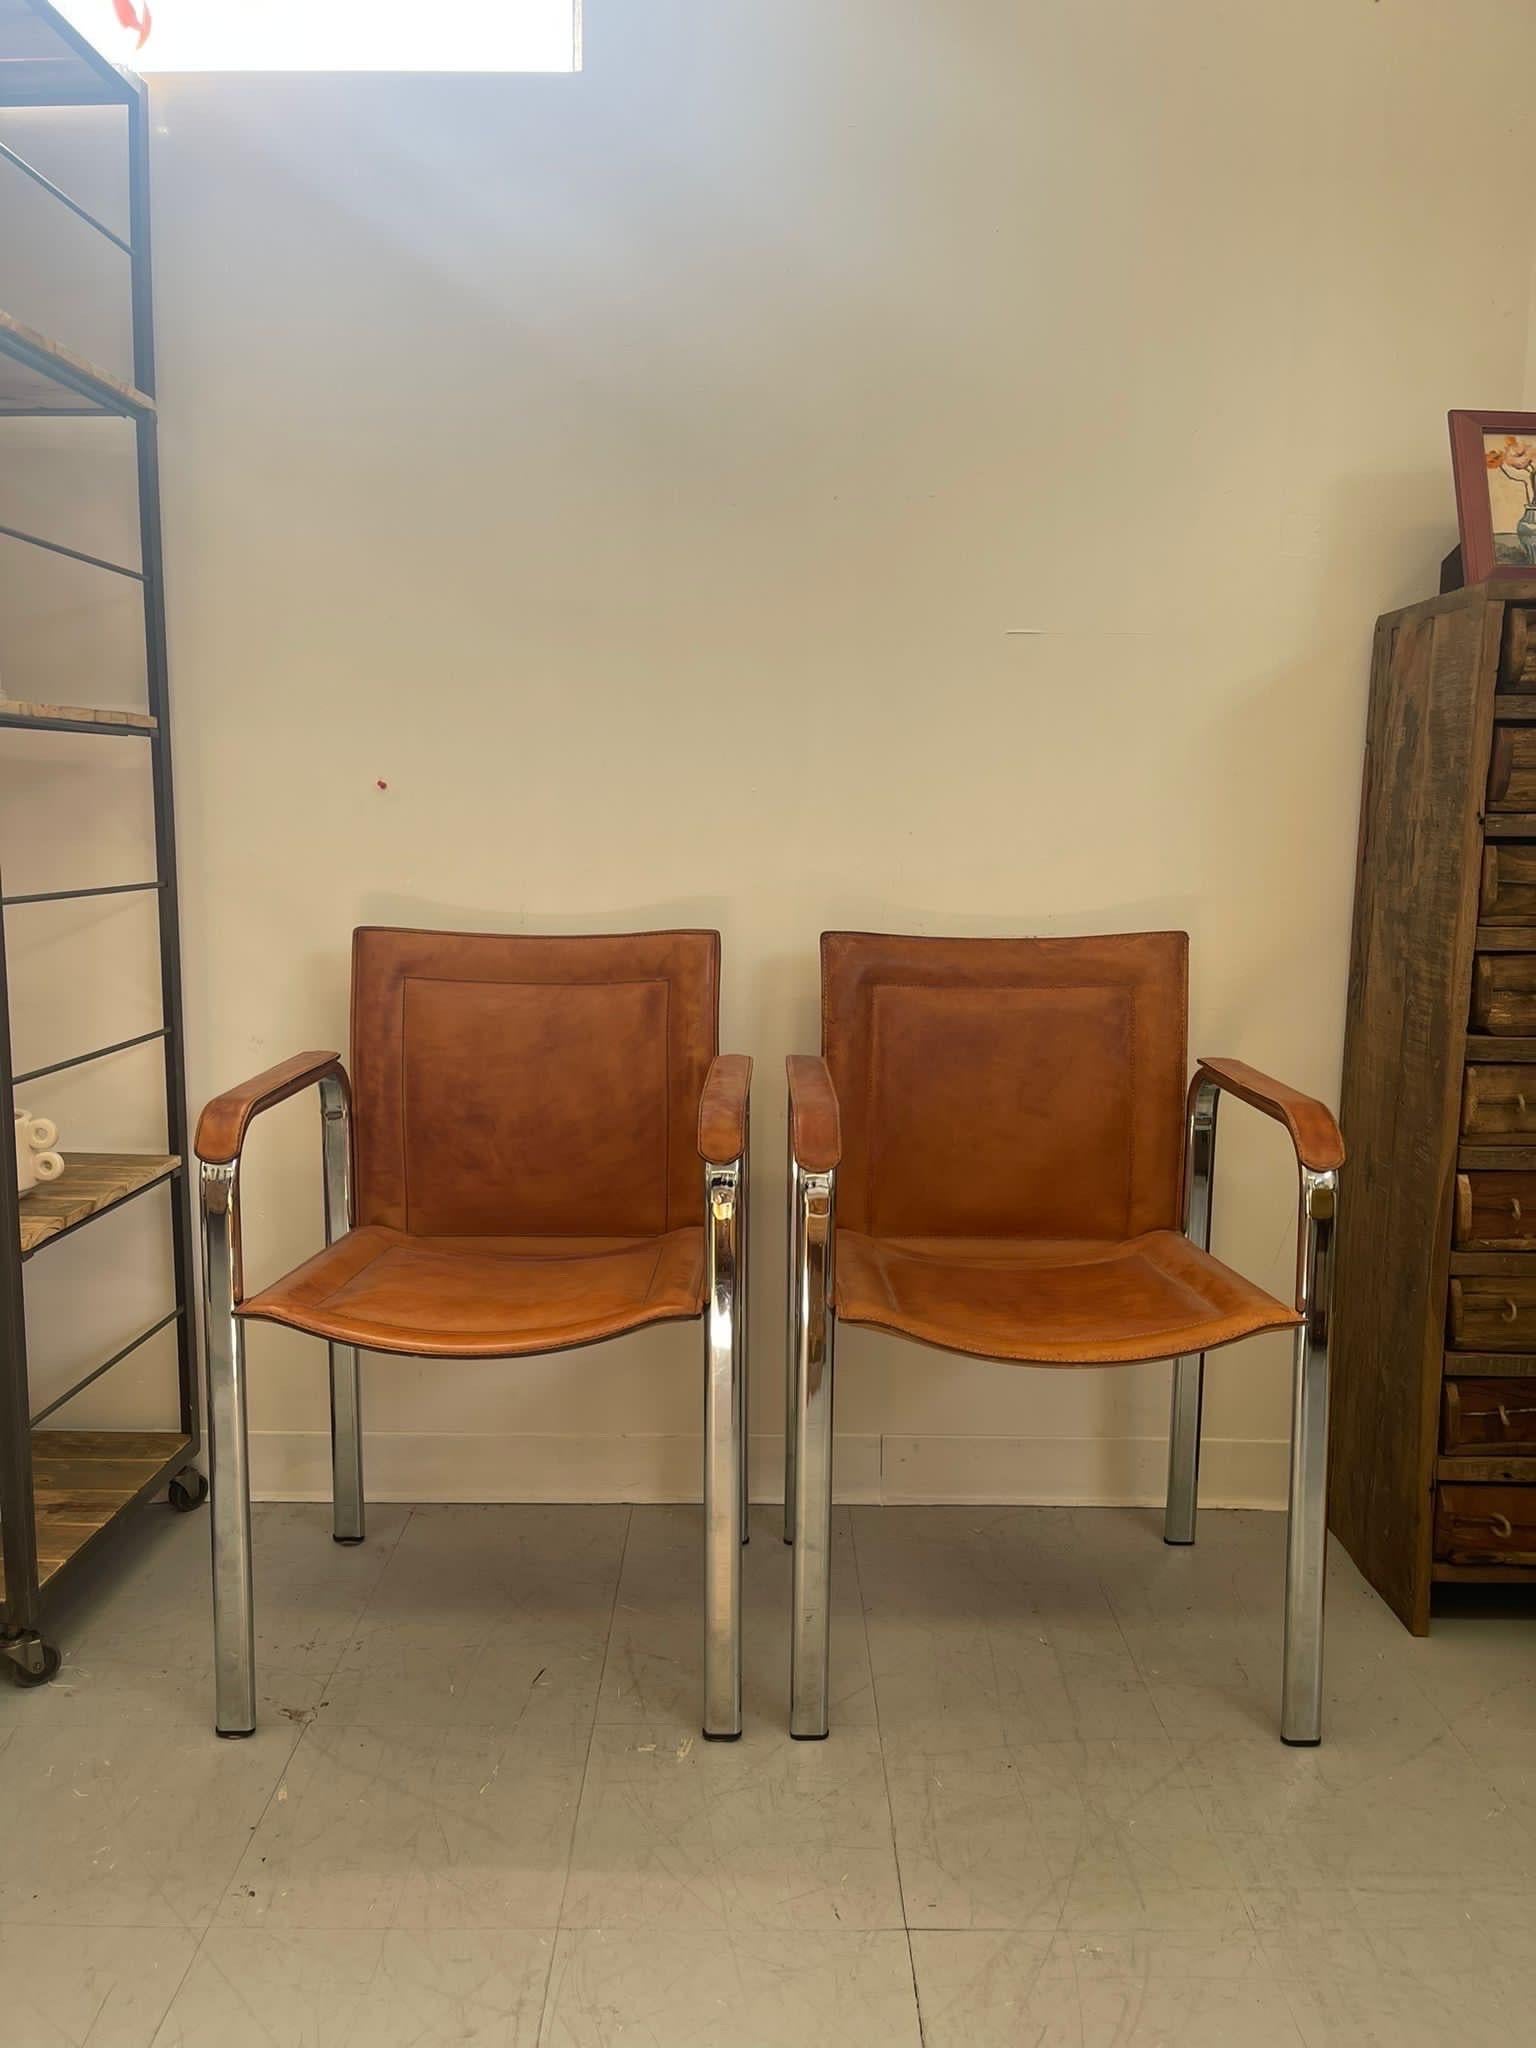 Swedish Set of Chairs with Leather Seats and Arm Rests. Silver Chrome Accent. Vintage Condition Consistent with Age as Pictured.

Dimensions. 22 W ; 19 D ; 32 H